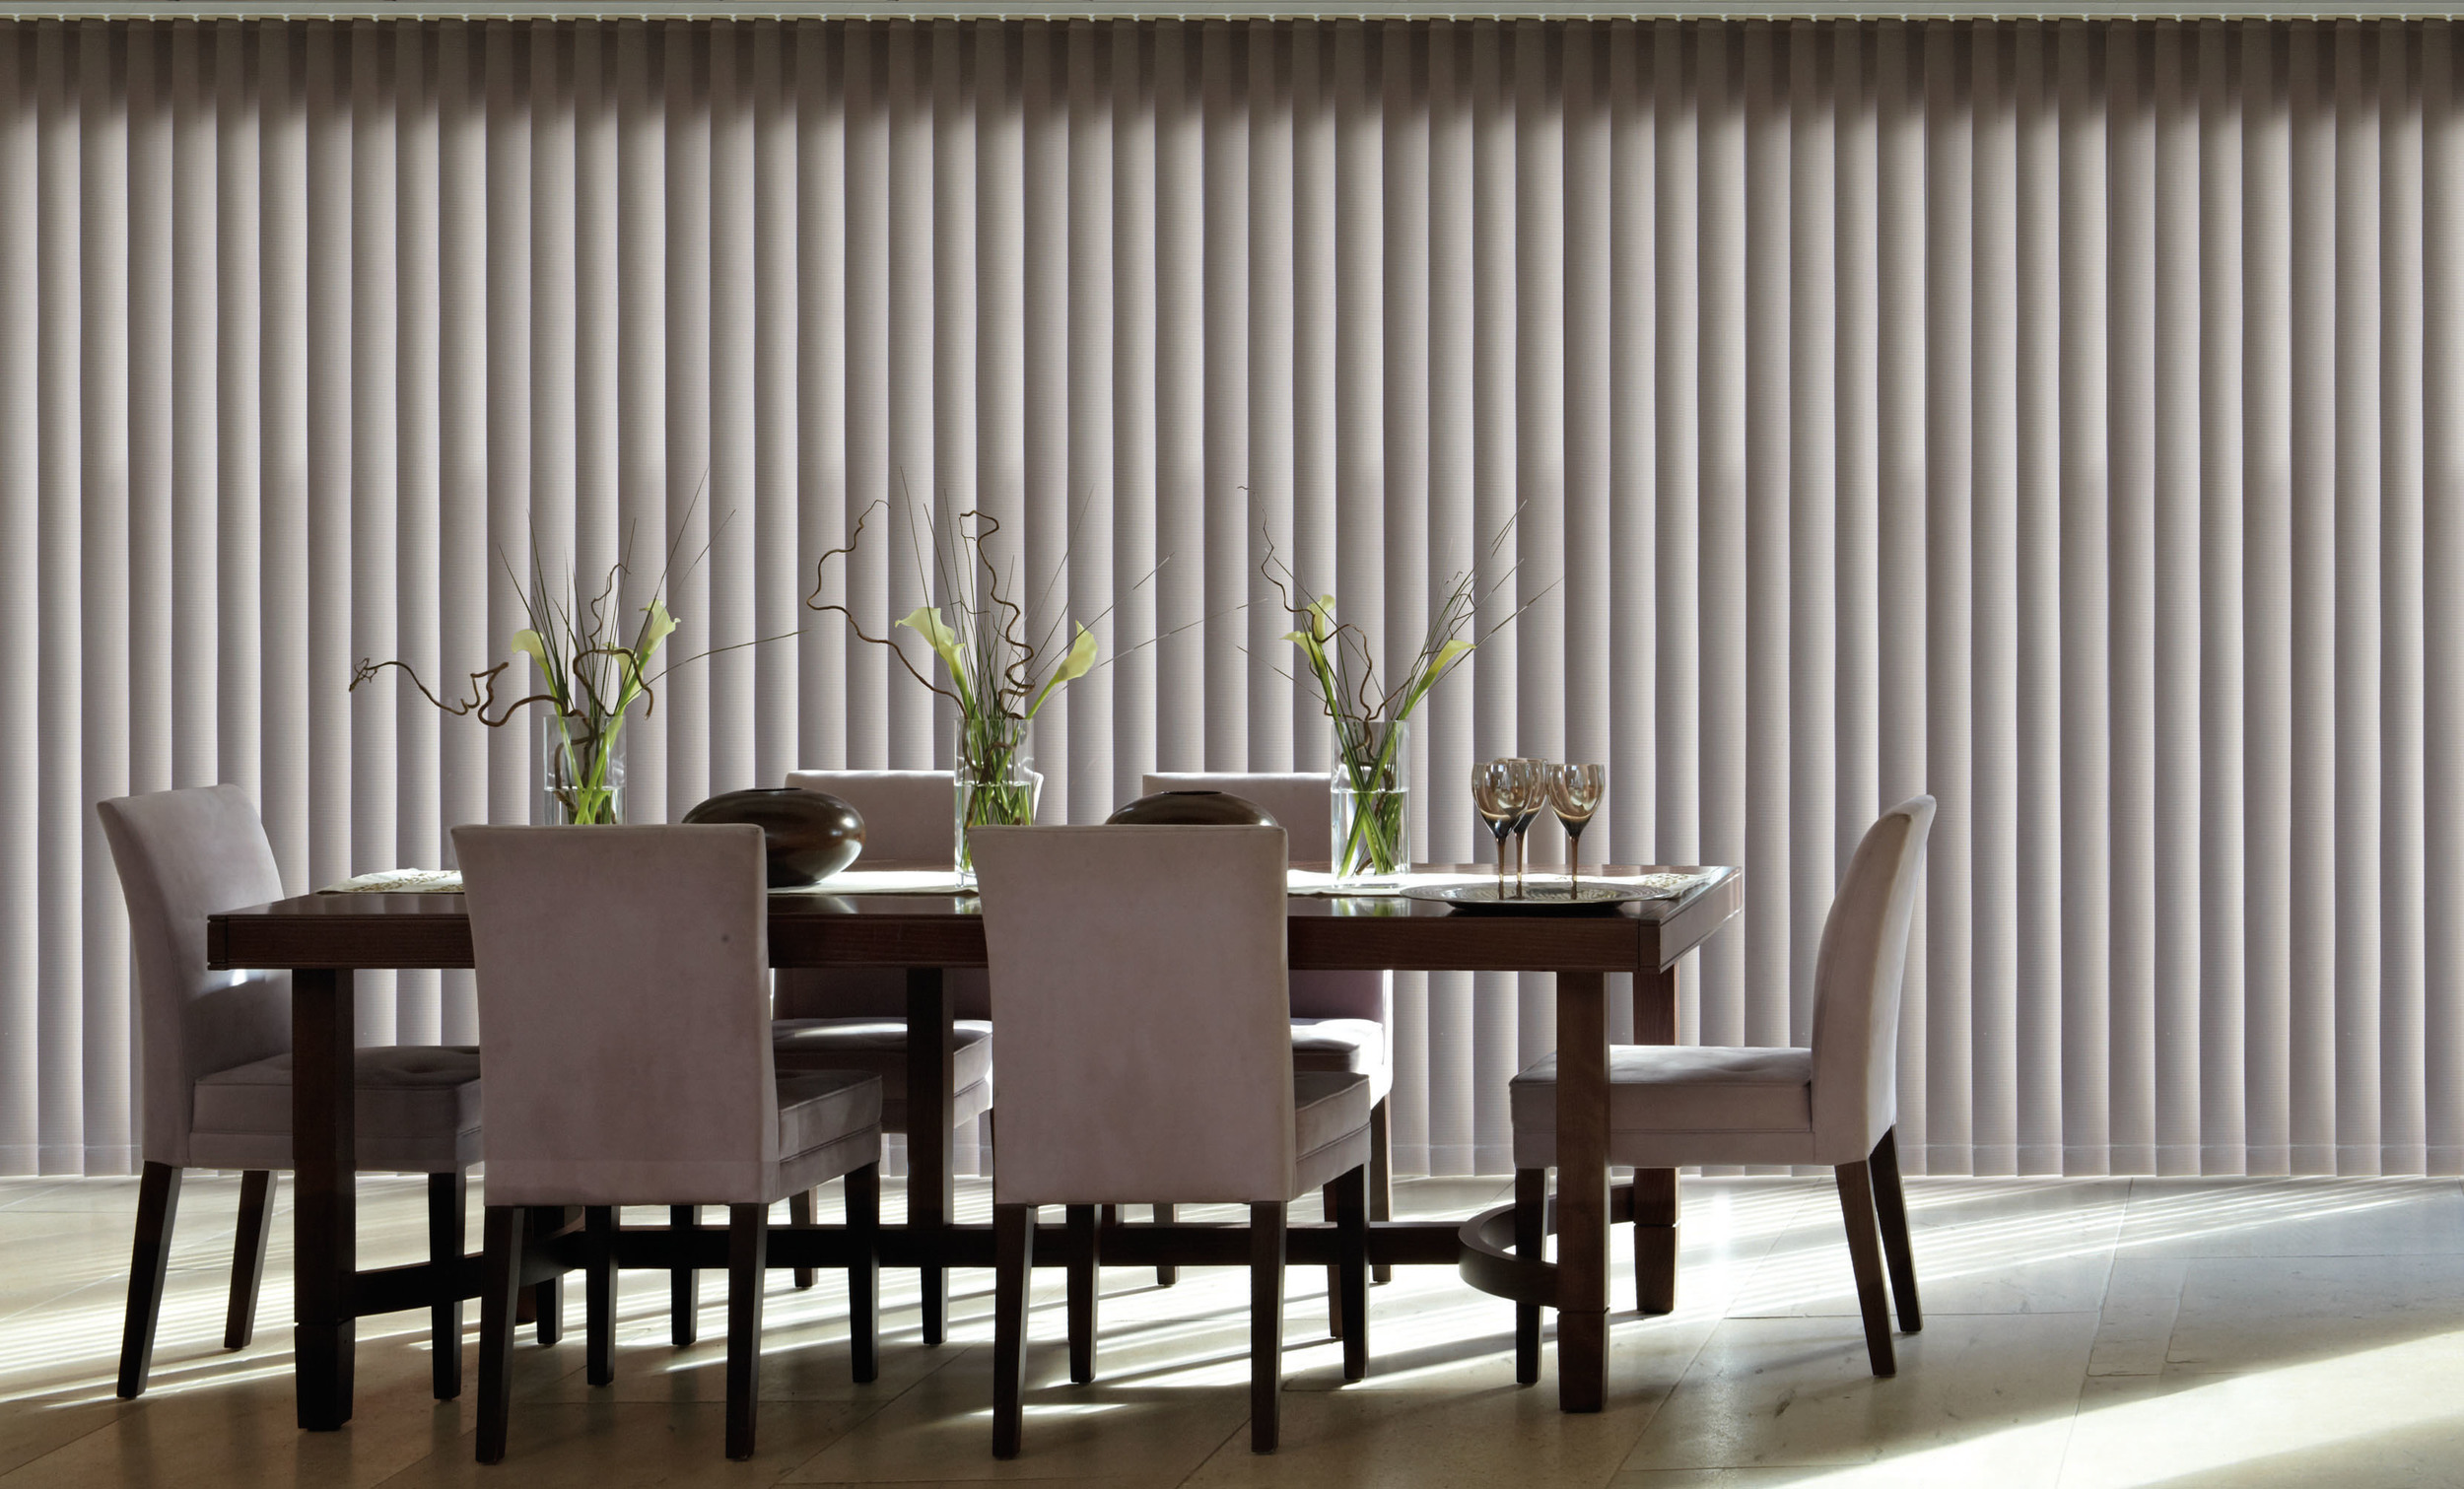   Vertical Blinds    With PVC SLATS   No Chains, Hard Wearing, Easy to Clean and Blackout   Learn More  